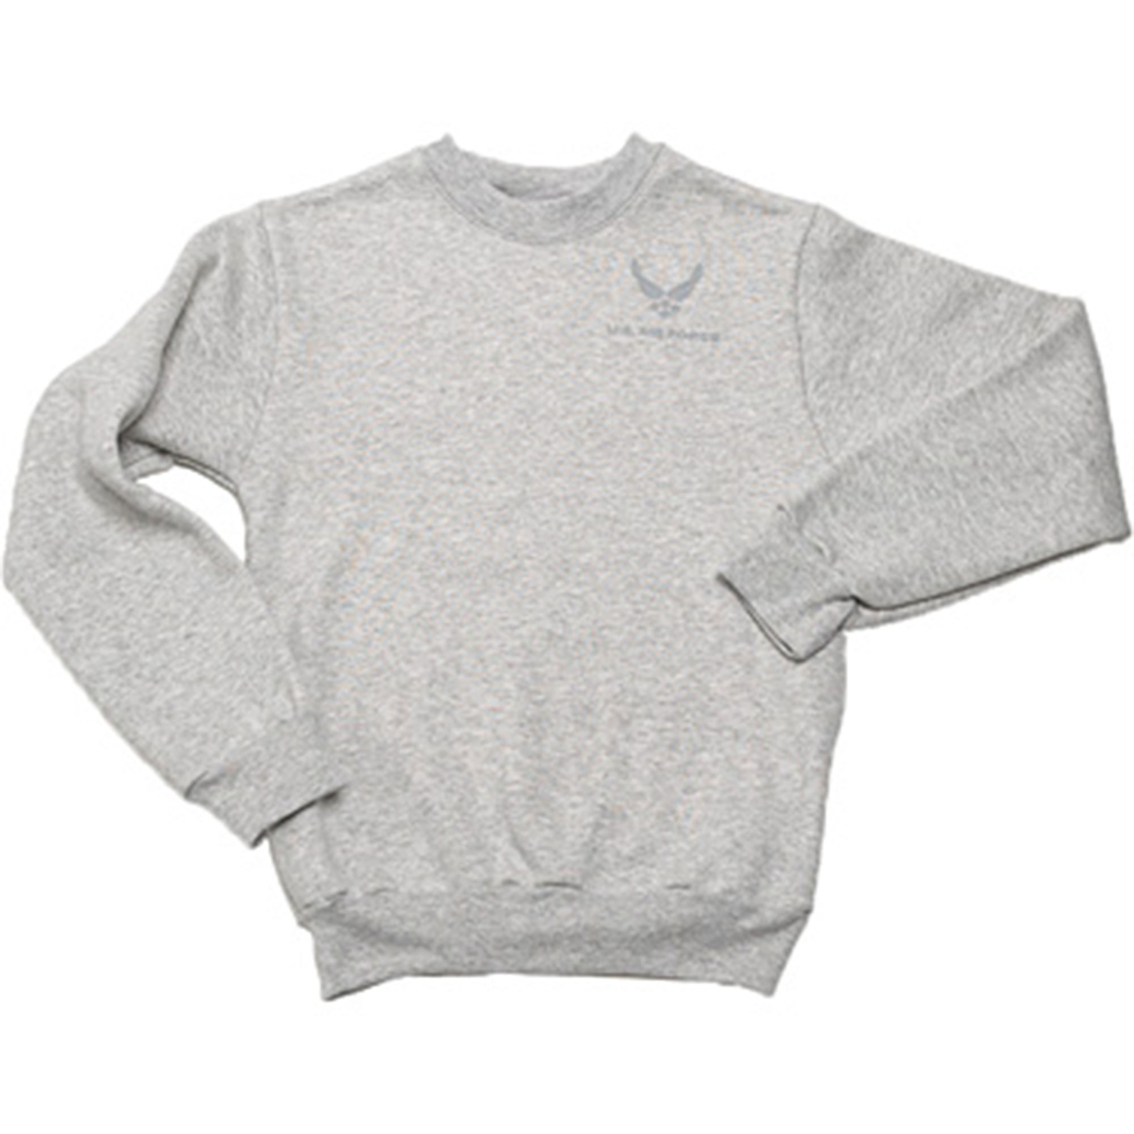 Air Force Pullover Sweatshirt - Image 1 of 2